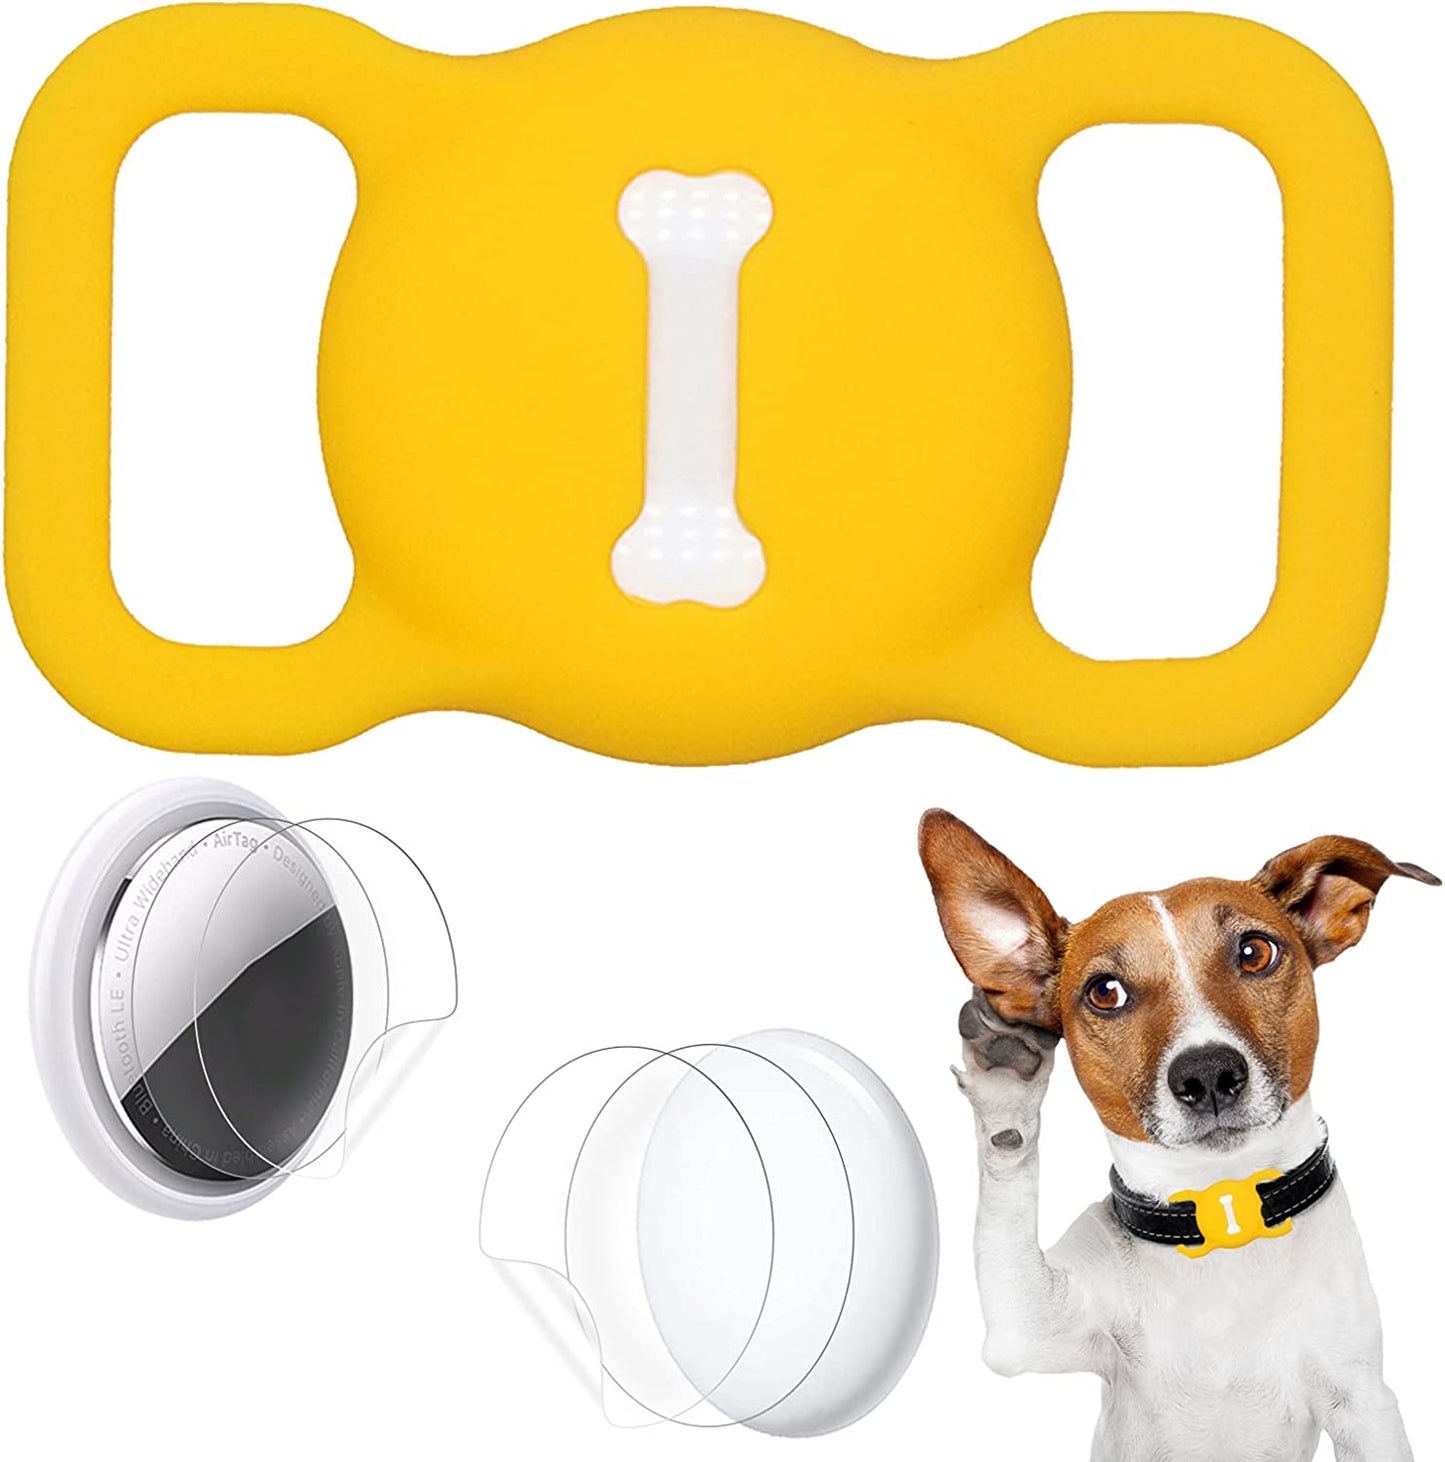 Protective Case Compatible for Apple Airtags for Dog Cat Collar Pet Loop Holder, Airtag Holder Accessories with Screen Protectors, Air Tag Silicone Cover for Pet Collar Electronics > GPS Accessories > GPS Cases Wustentre Yellow  